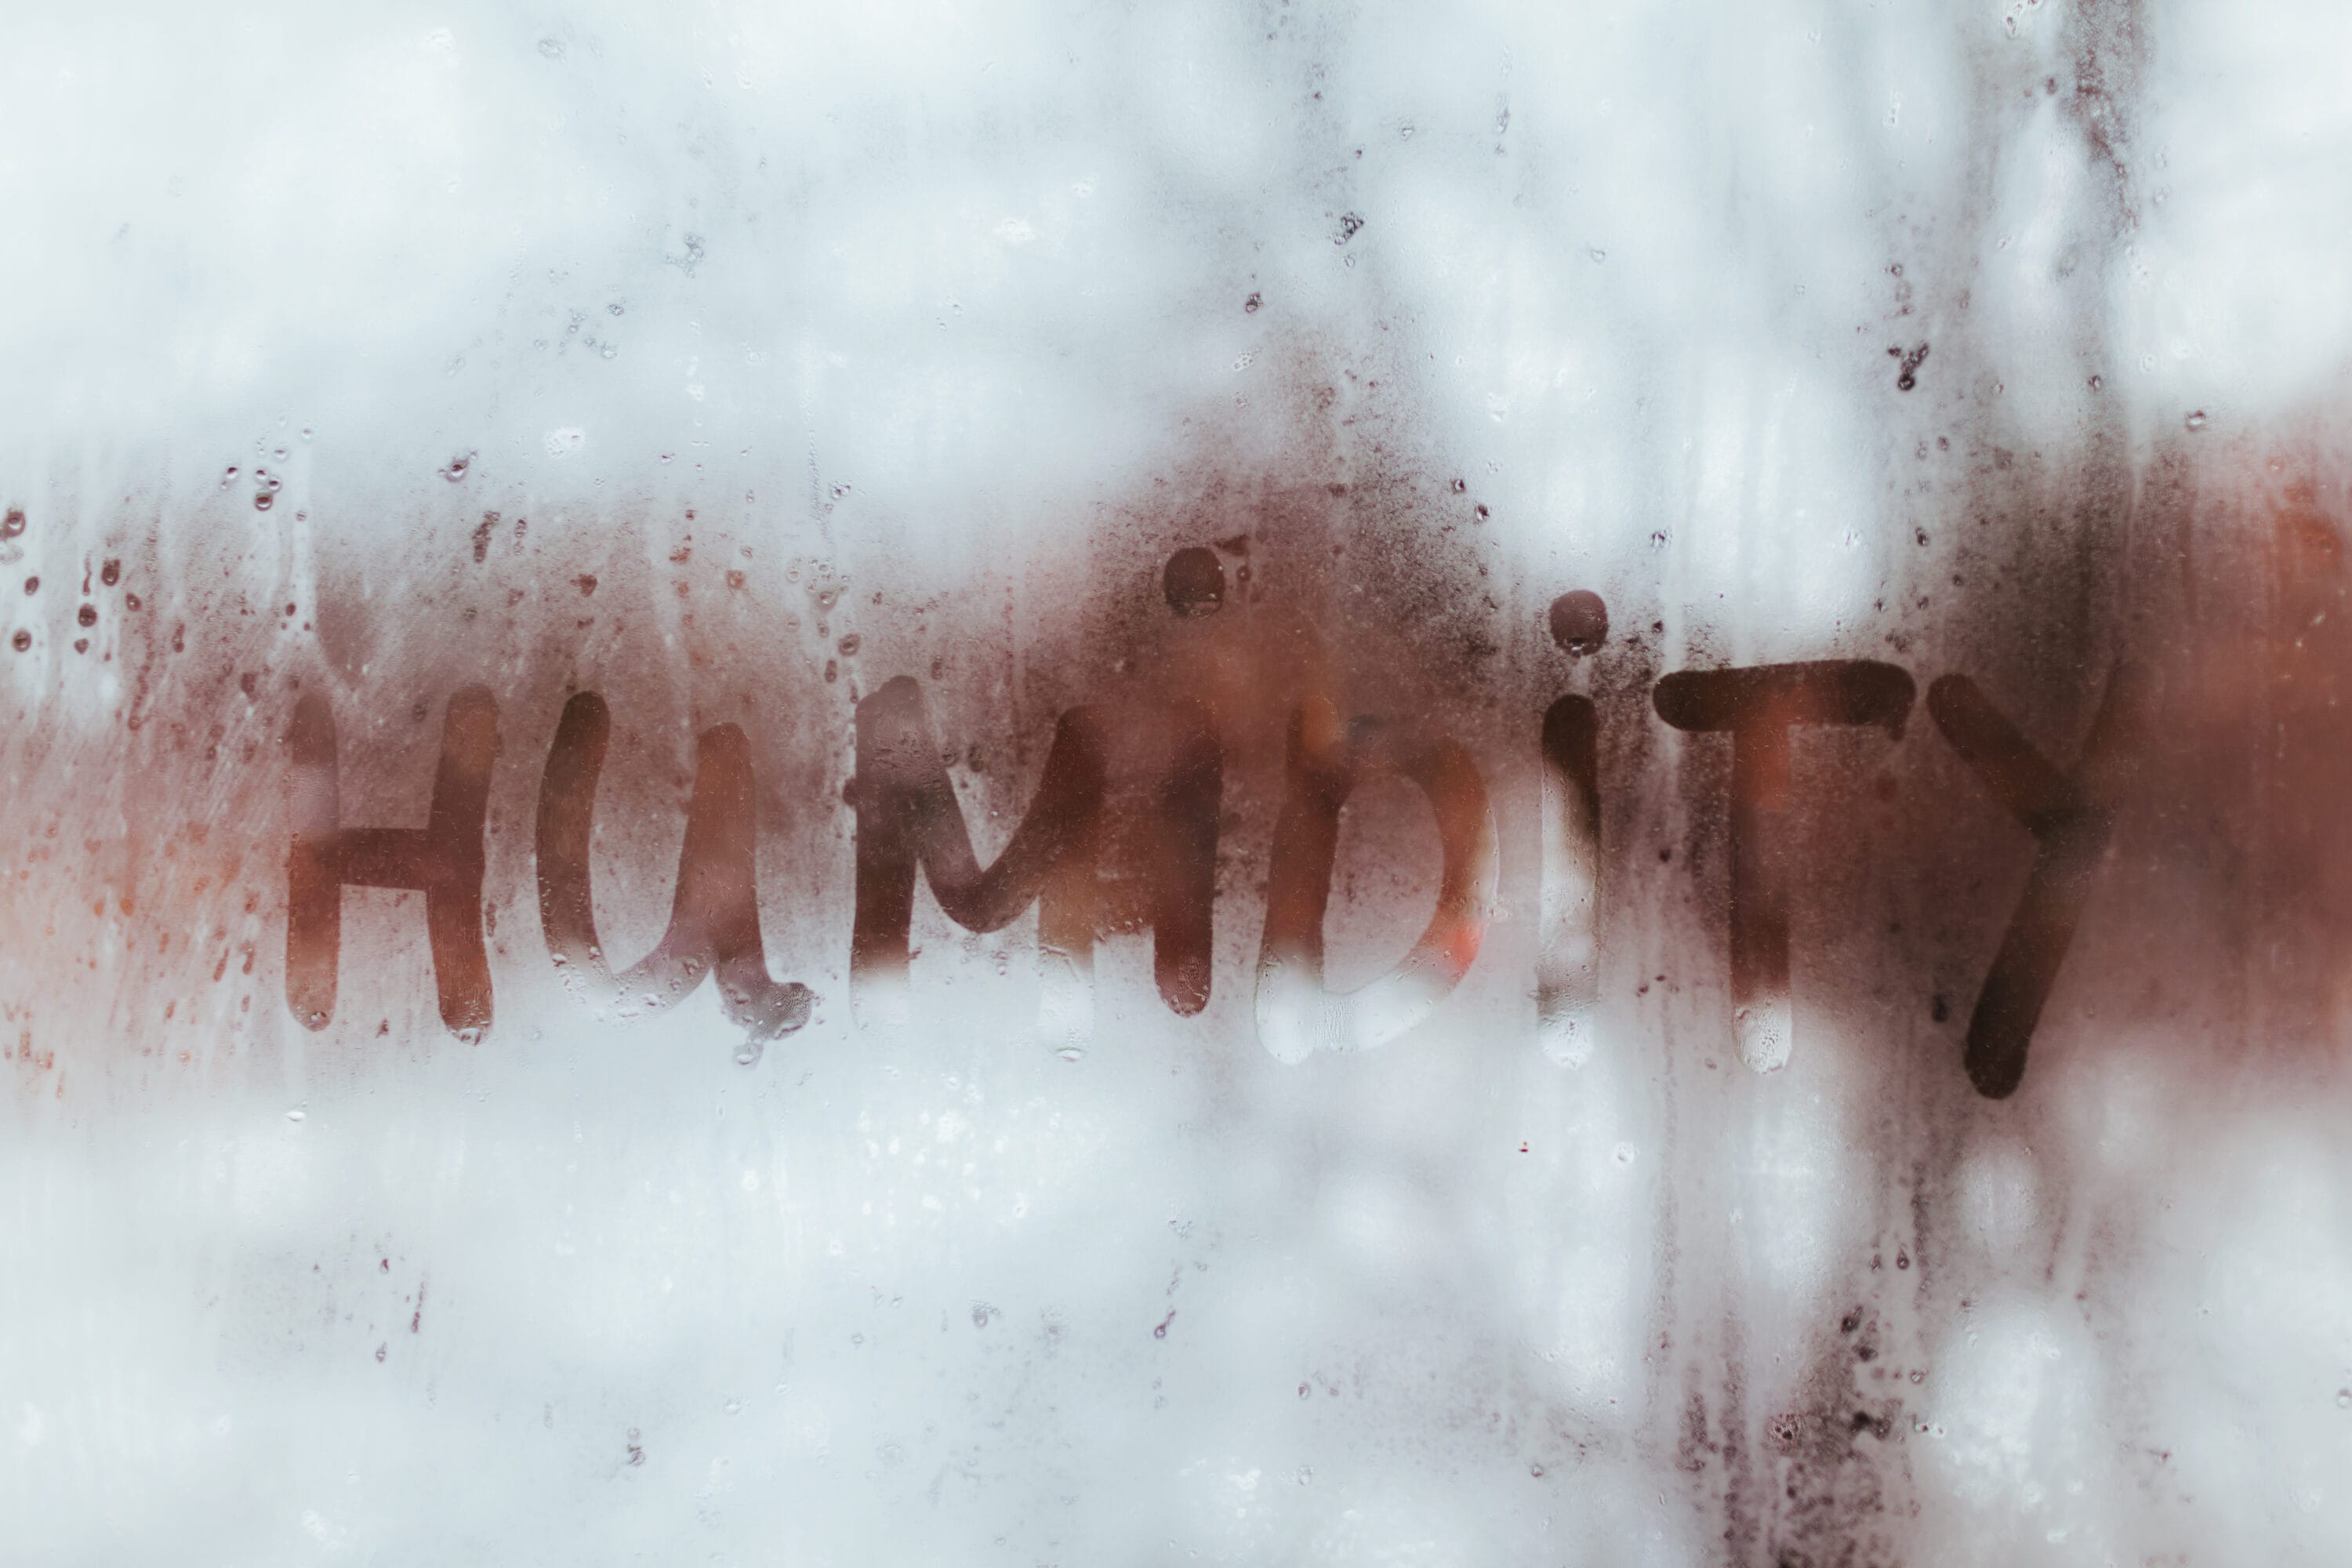 condensation on a window pane, with "humidity" written in it, depicting a high level of humidity.